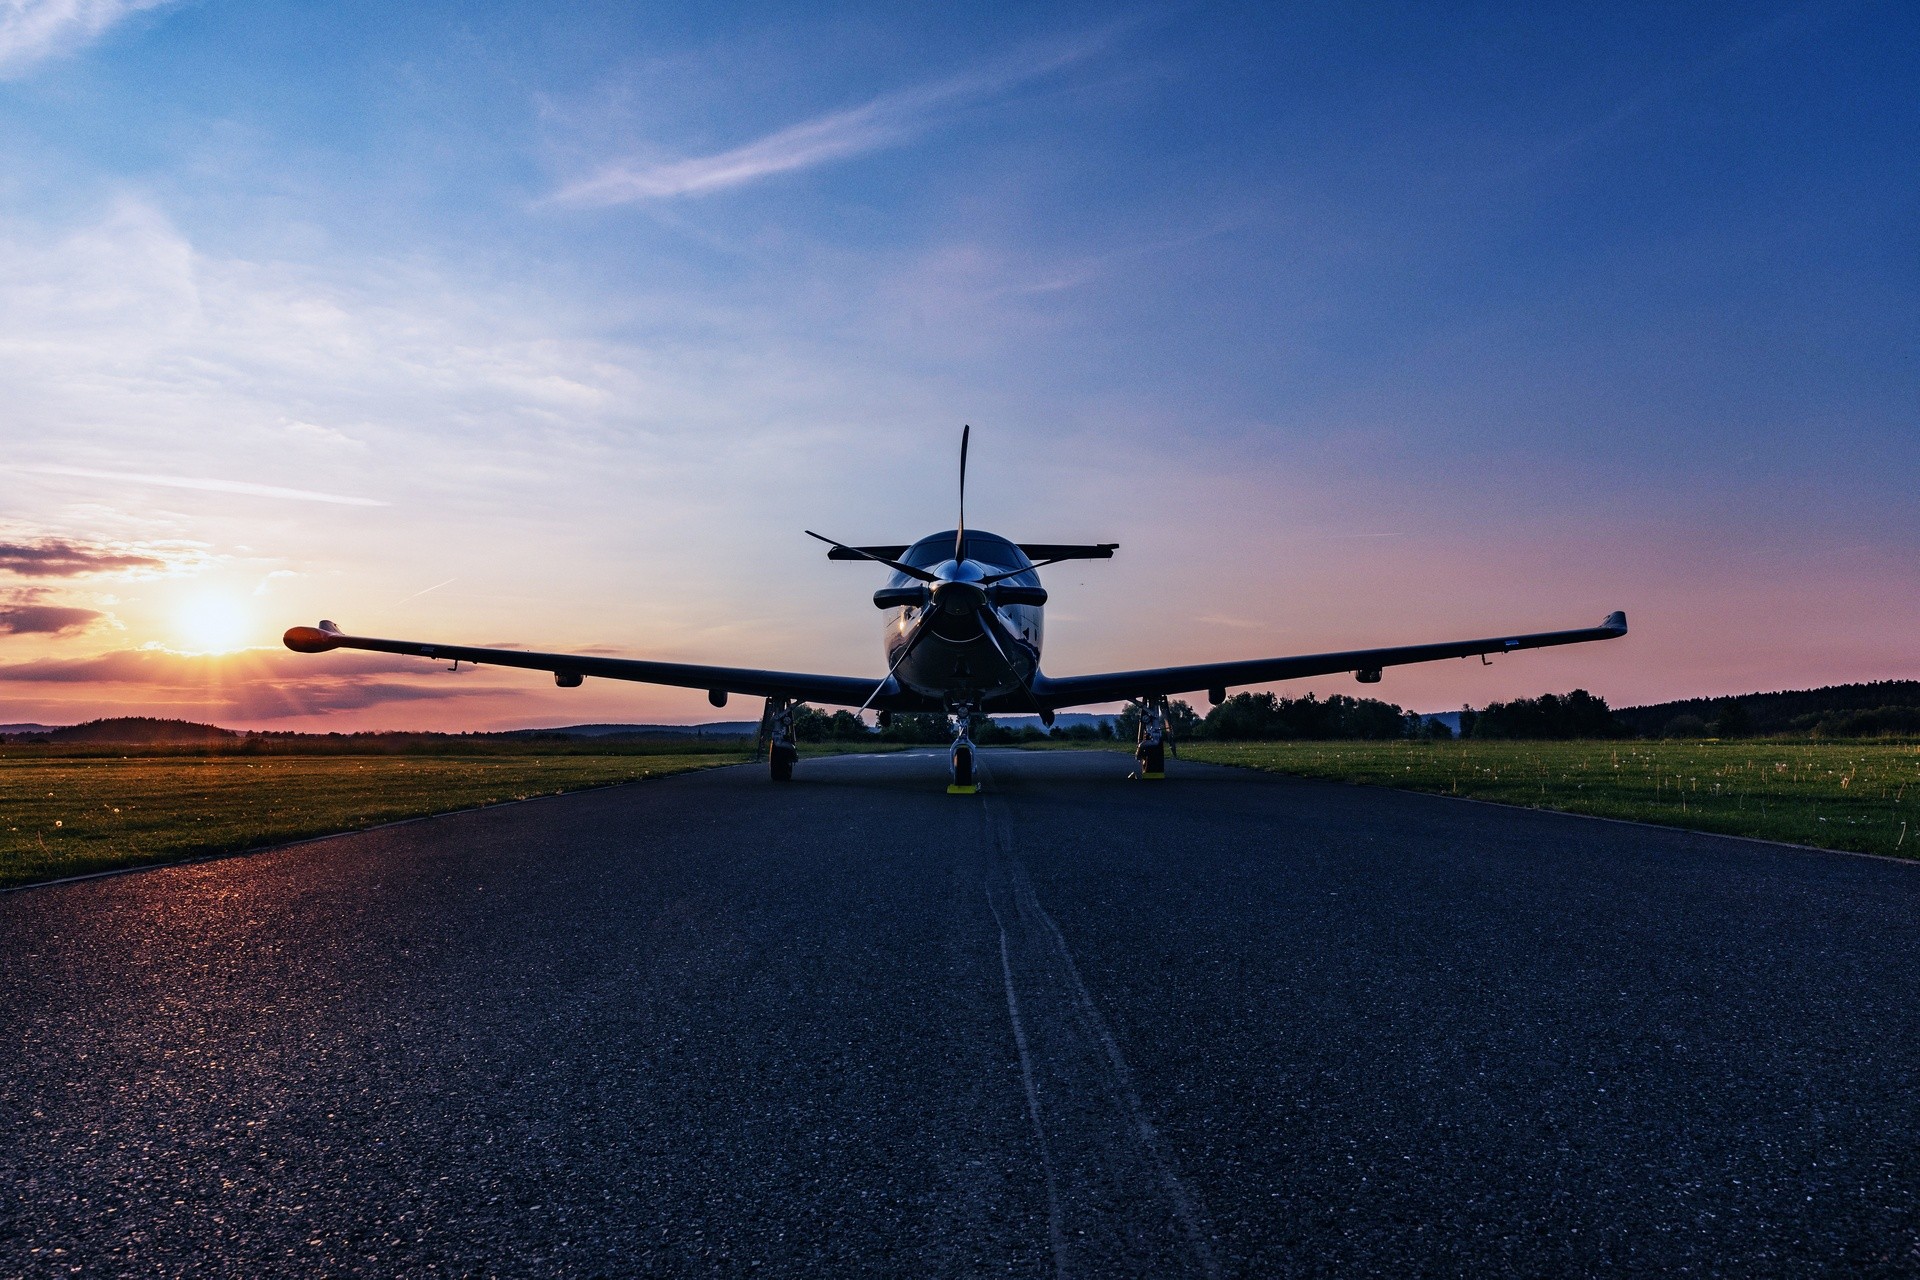 What type of turboprop aircraft can I charter for a private flight to the Bahamas